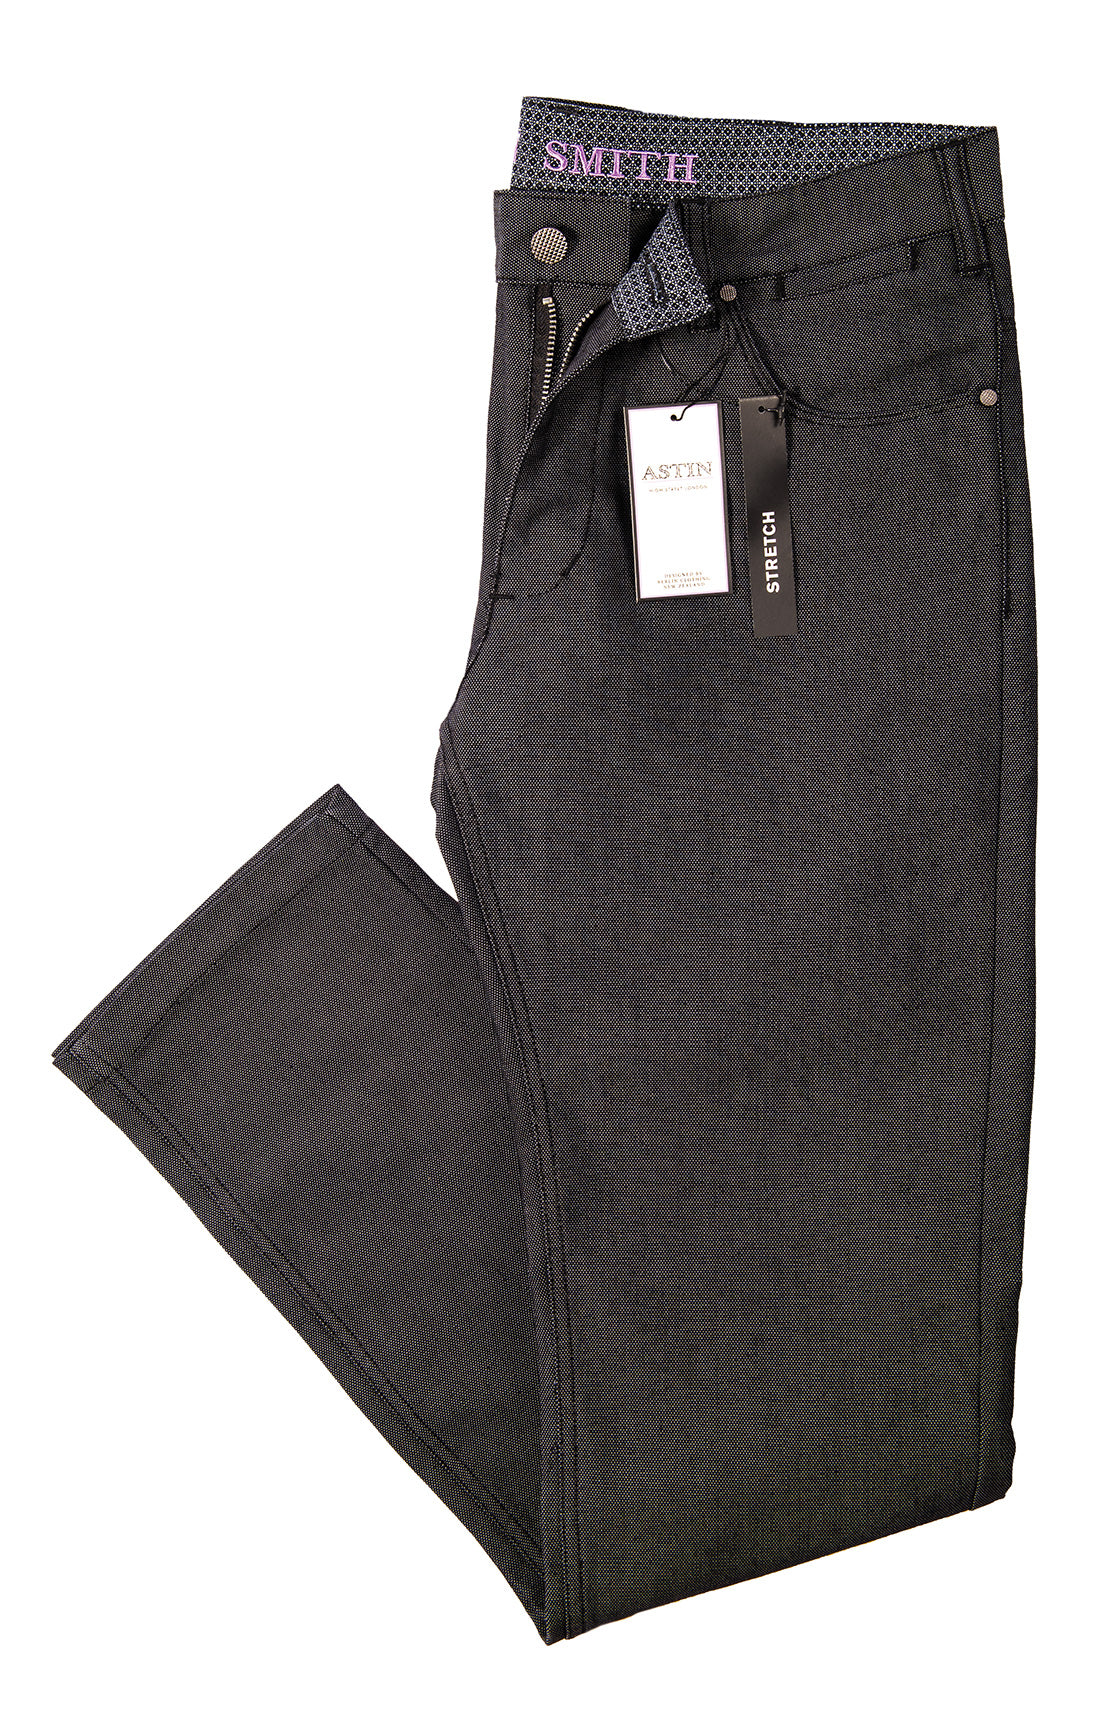 Astin Smith Oxford Casual 5 Pkt Pants